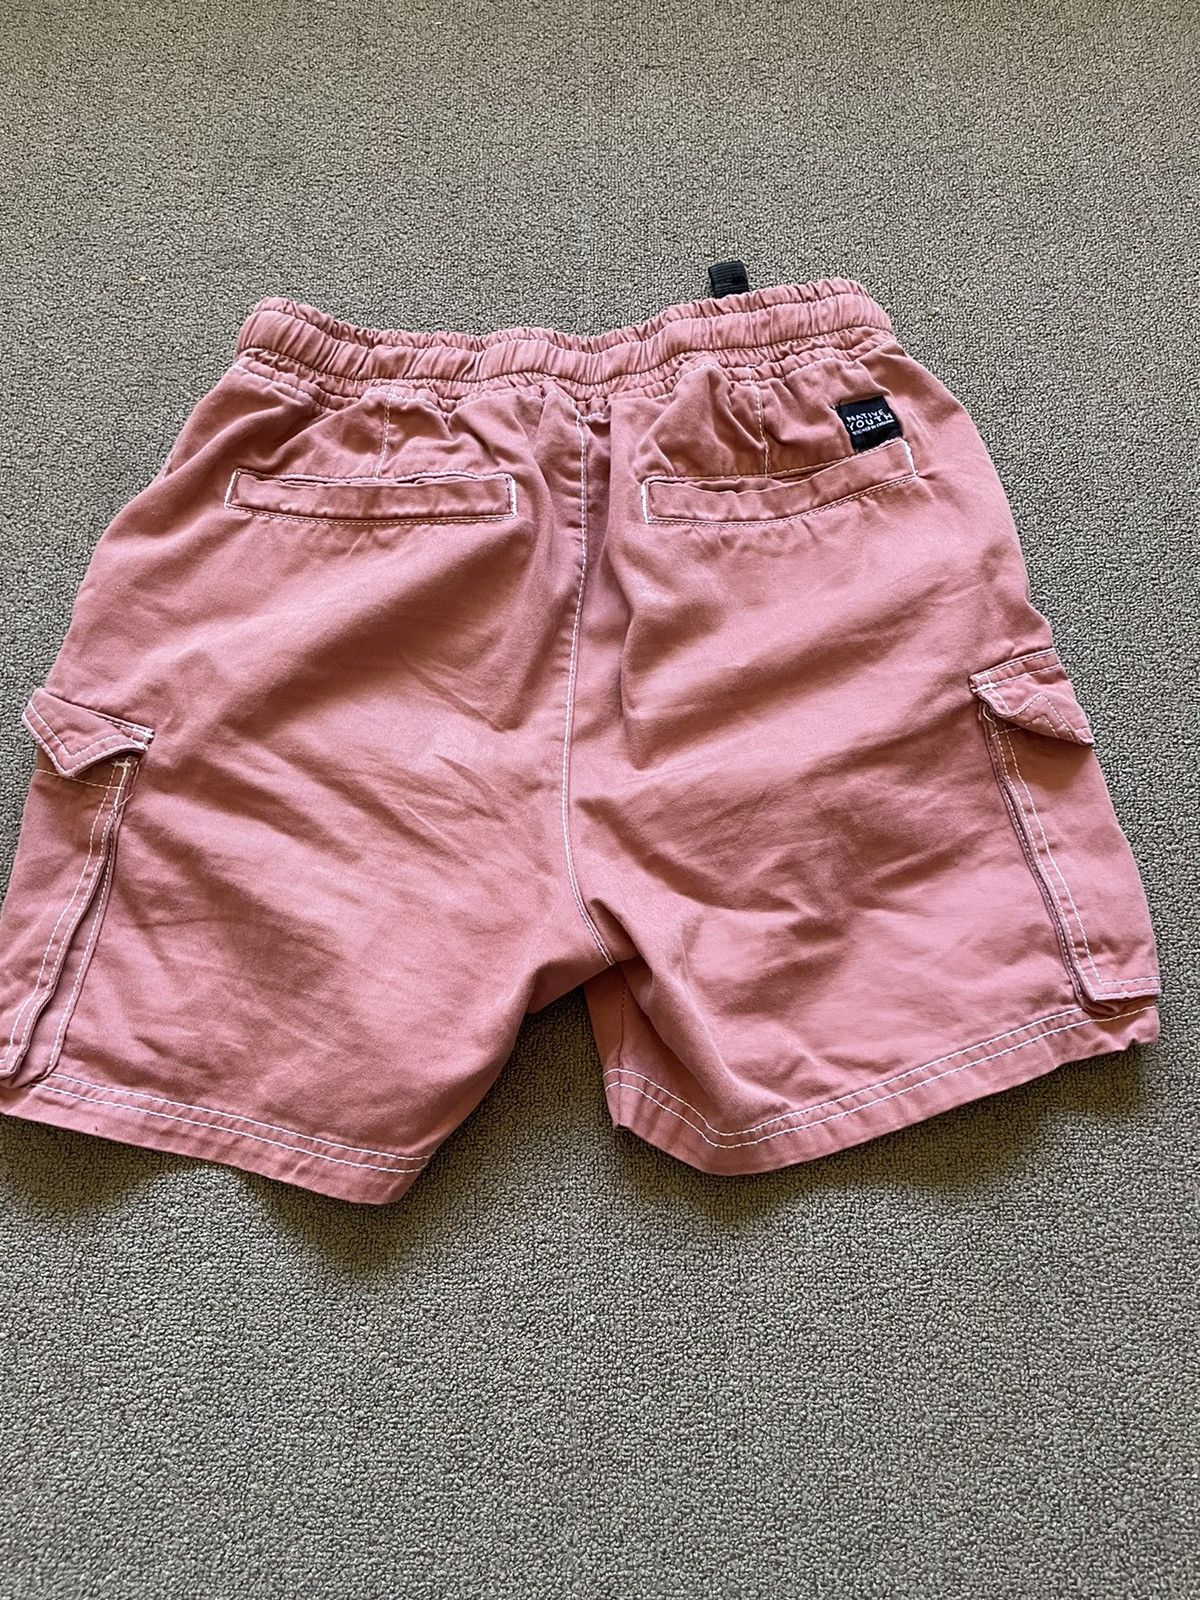 Urban Outfitters Sold Out Cargo Shorts Size US 32 / EU 48 - 2 Preview